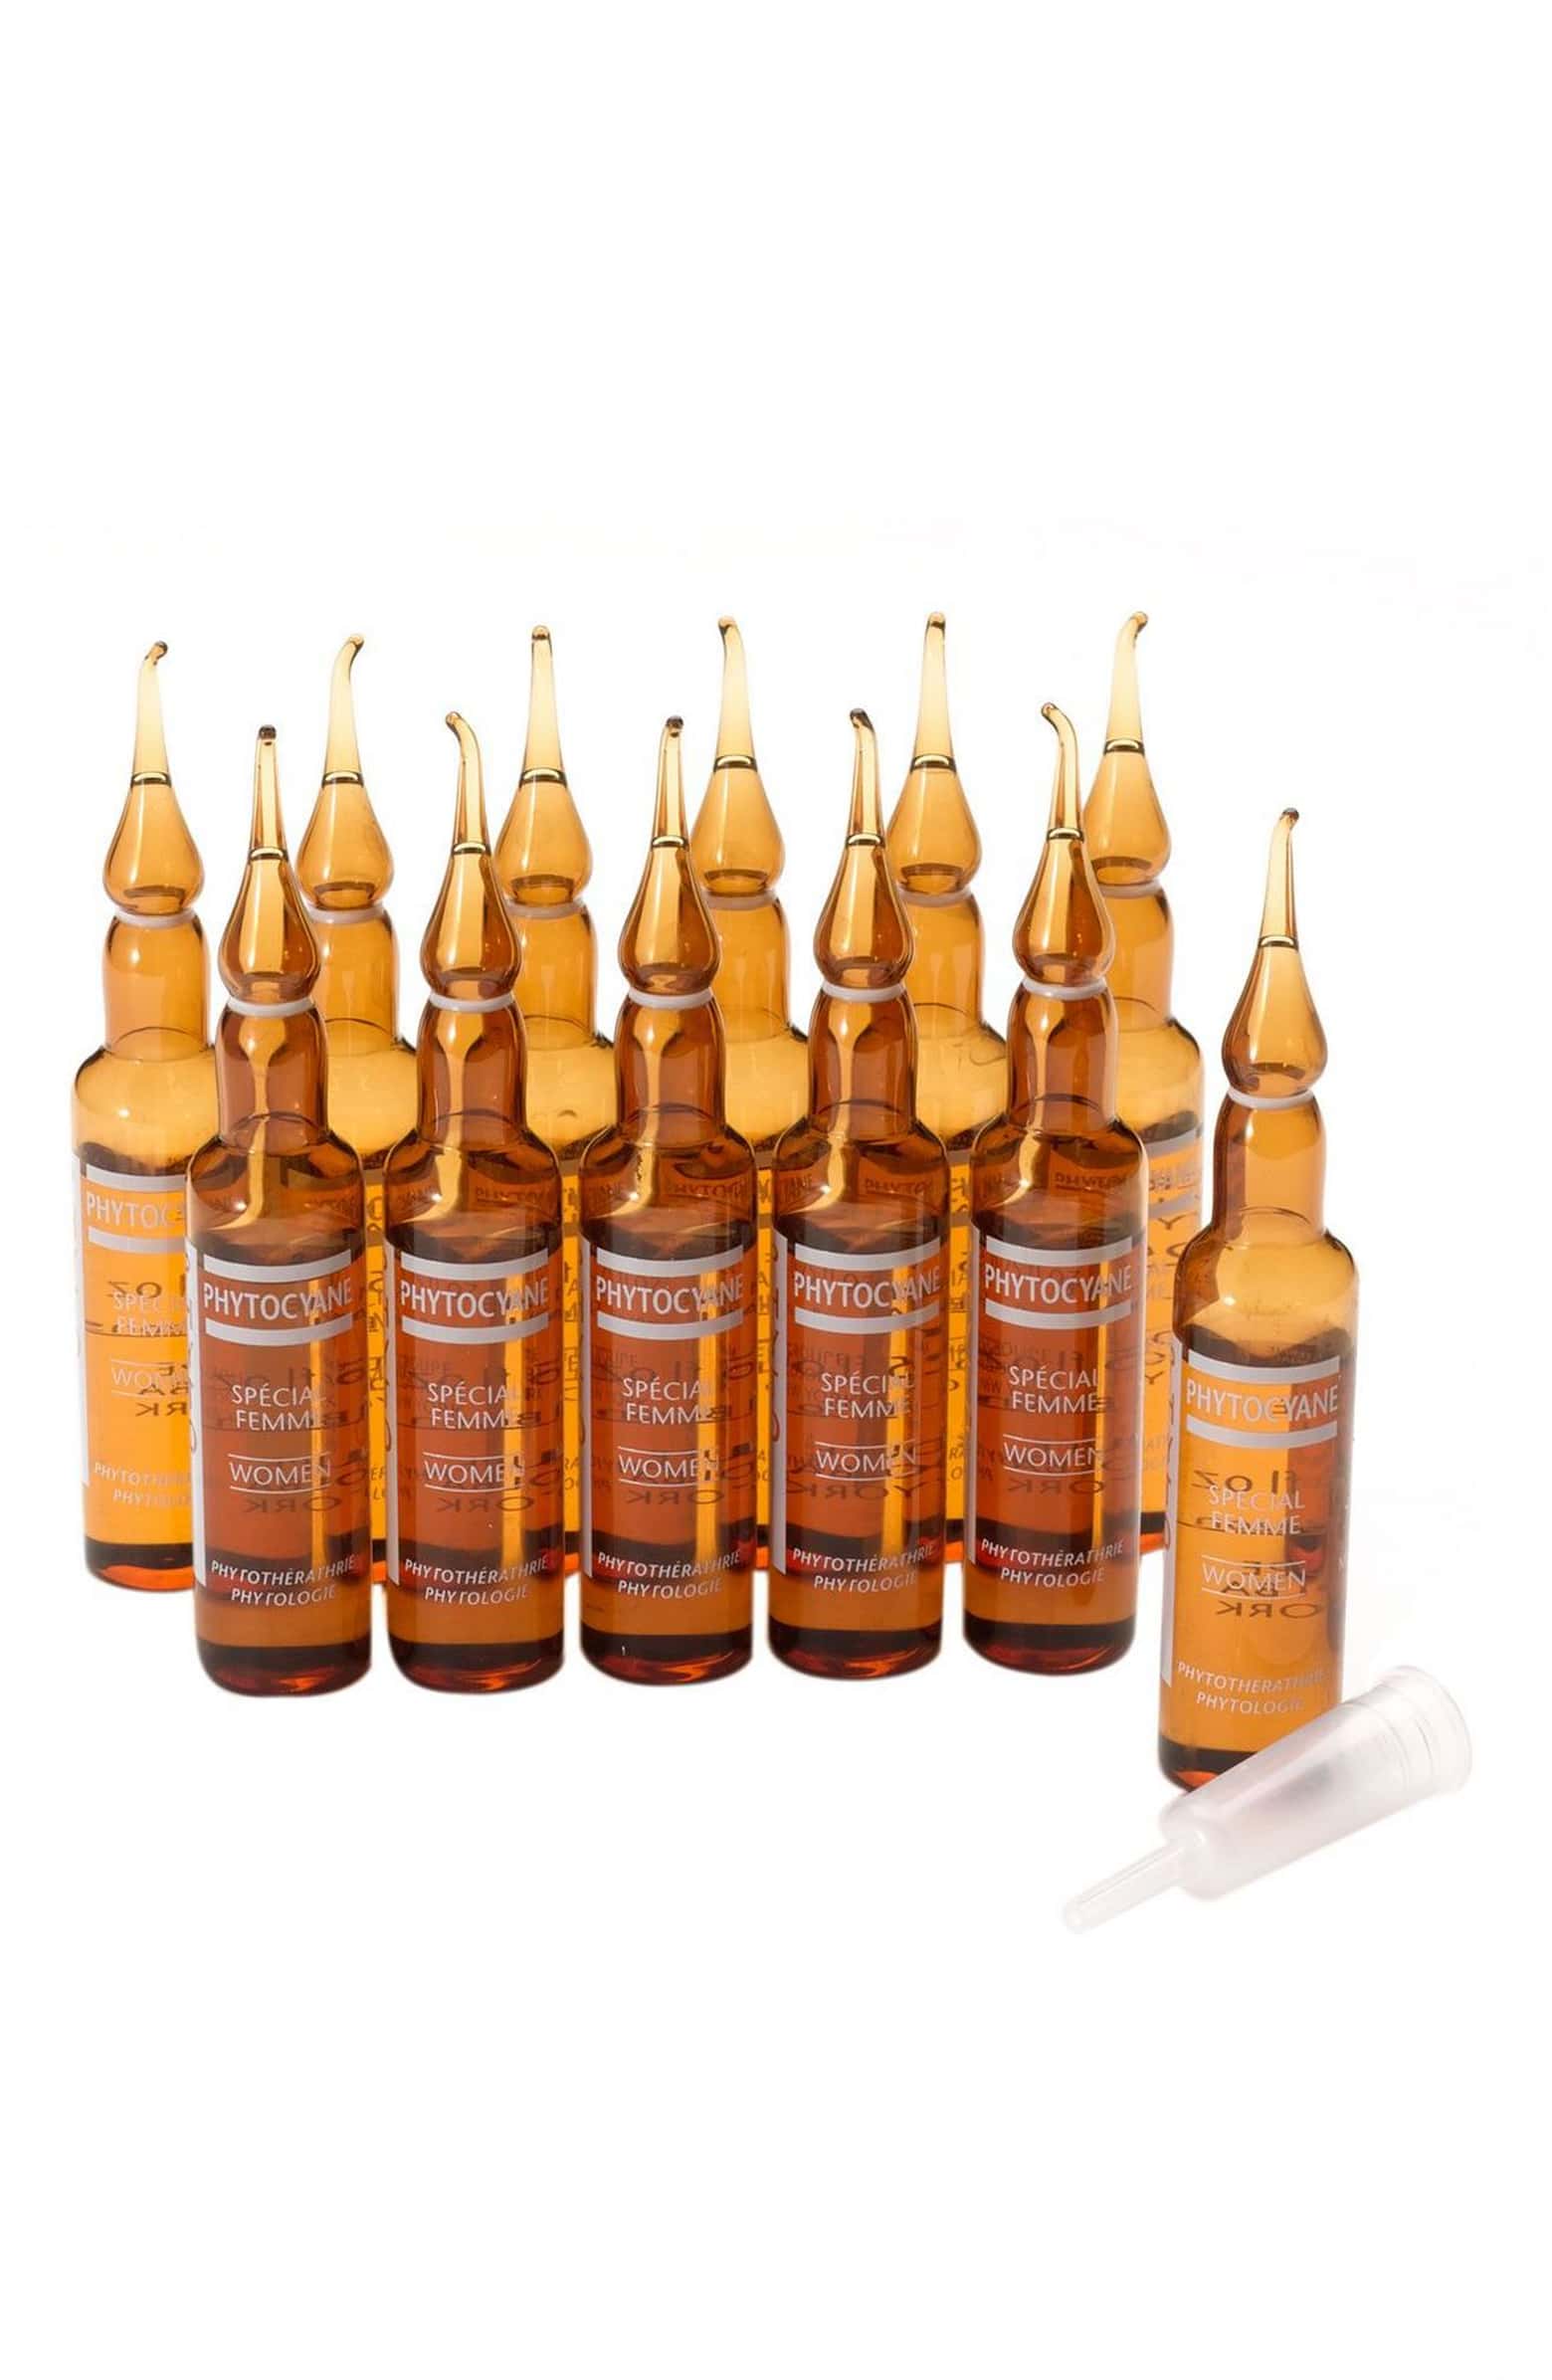 Shop Phyto Phytocyane Revitalizing Serum (12 ampoules) at New London Pharmacy. Formulated for those experiencing temporary hair loss due to seasonal changes, medication, stress, pregnancy or menopause. Free shipping on all orders of $50.00